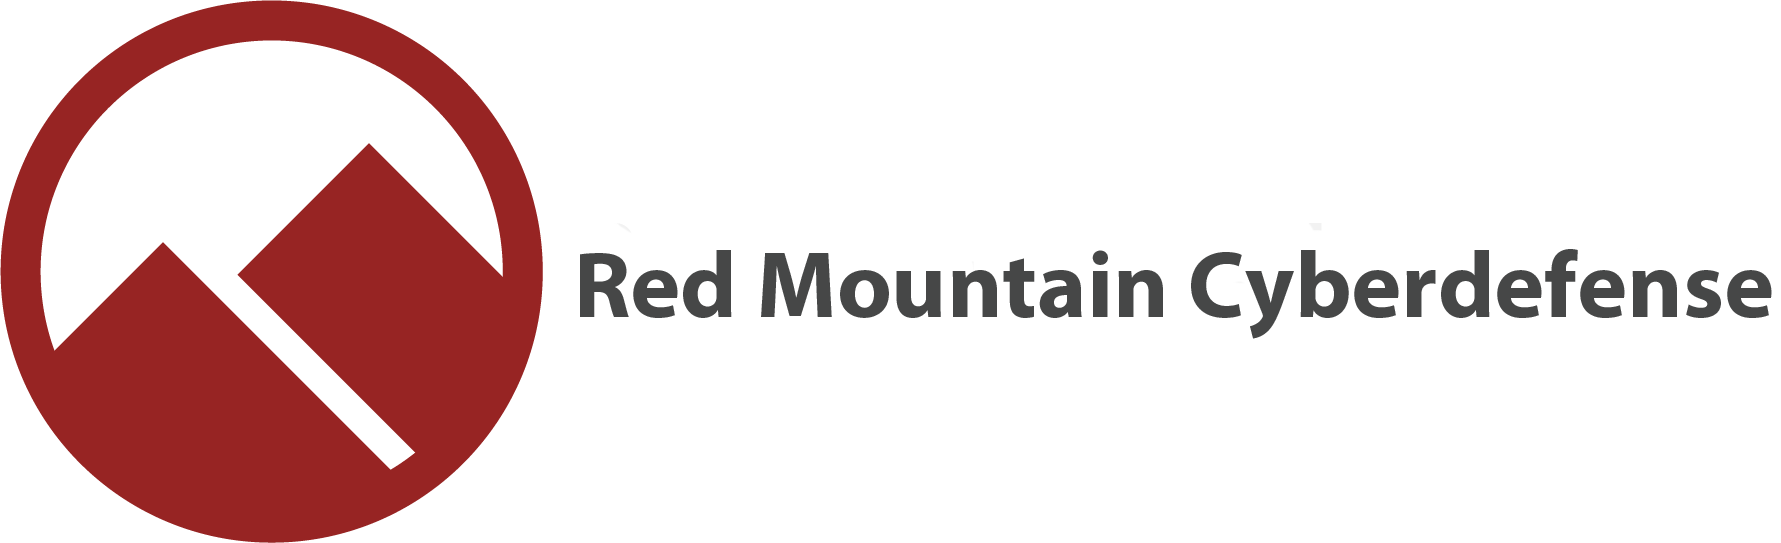 Red Mountain Logo - mobile security - Red Mountain Cyberdefense